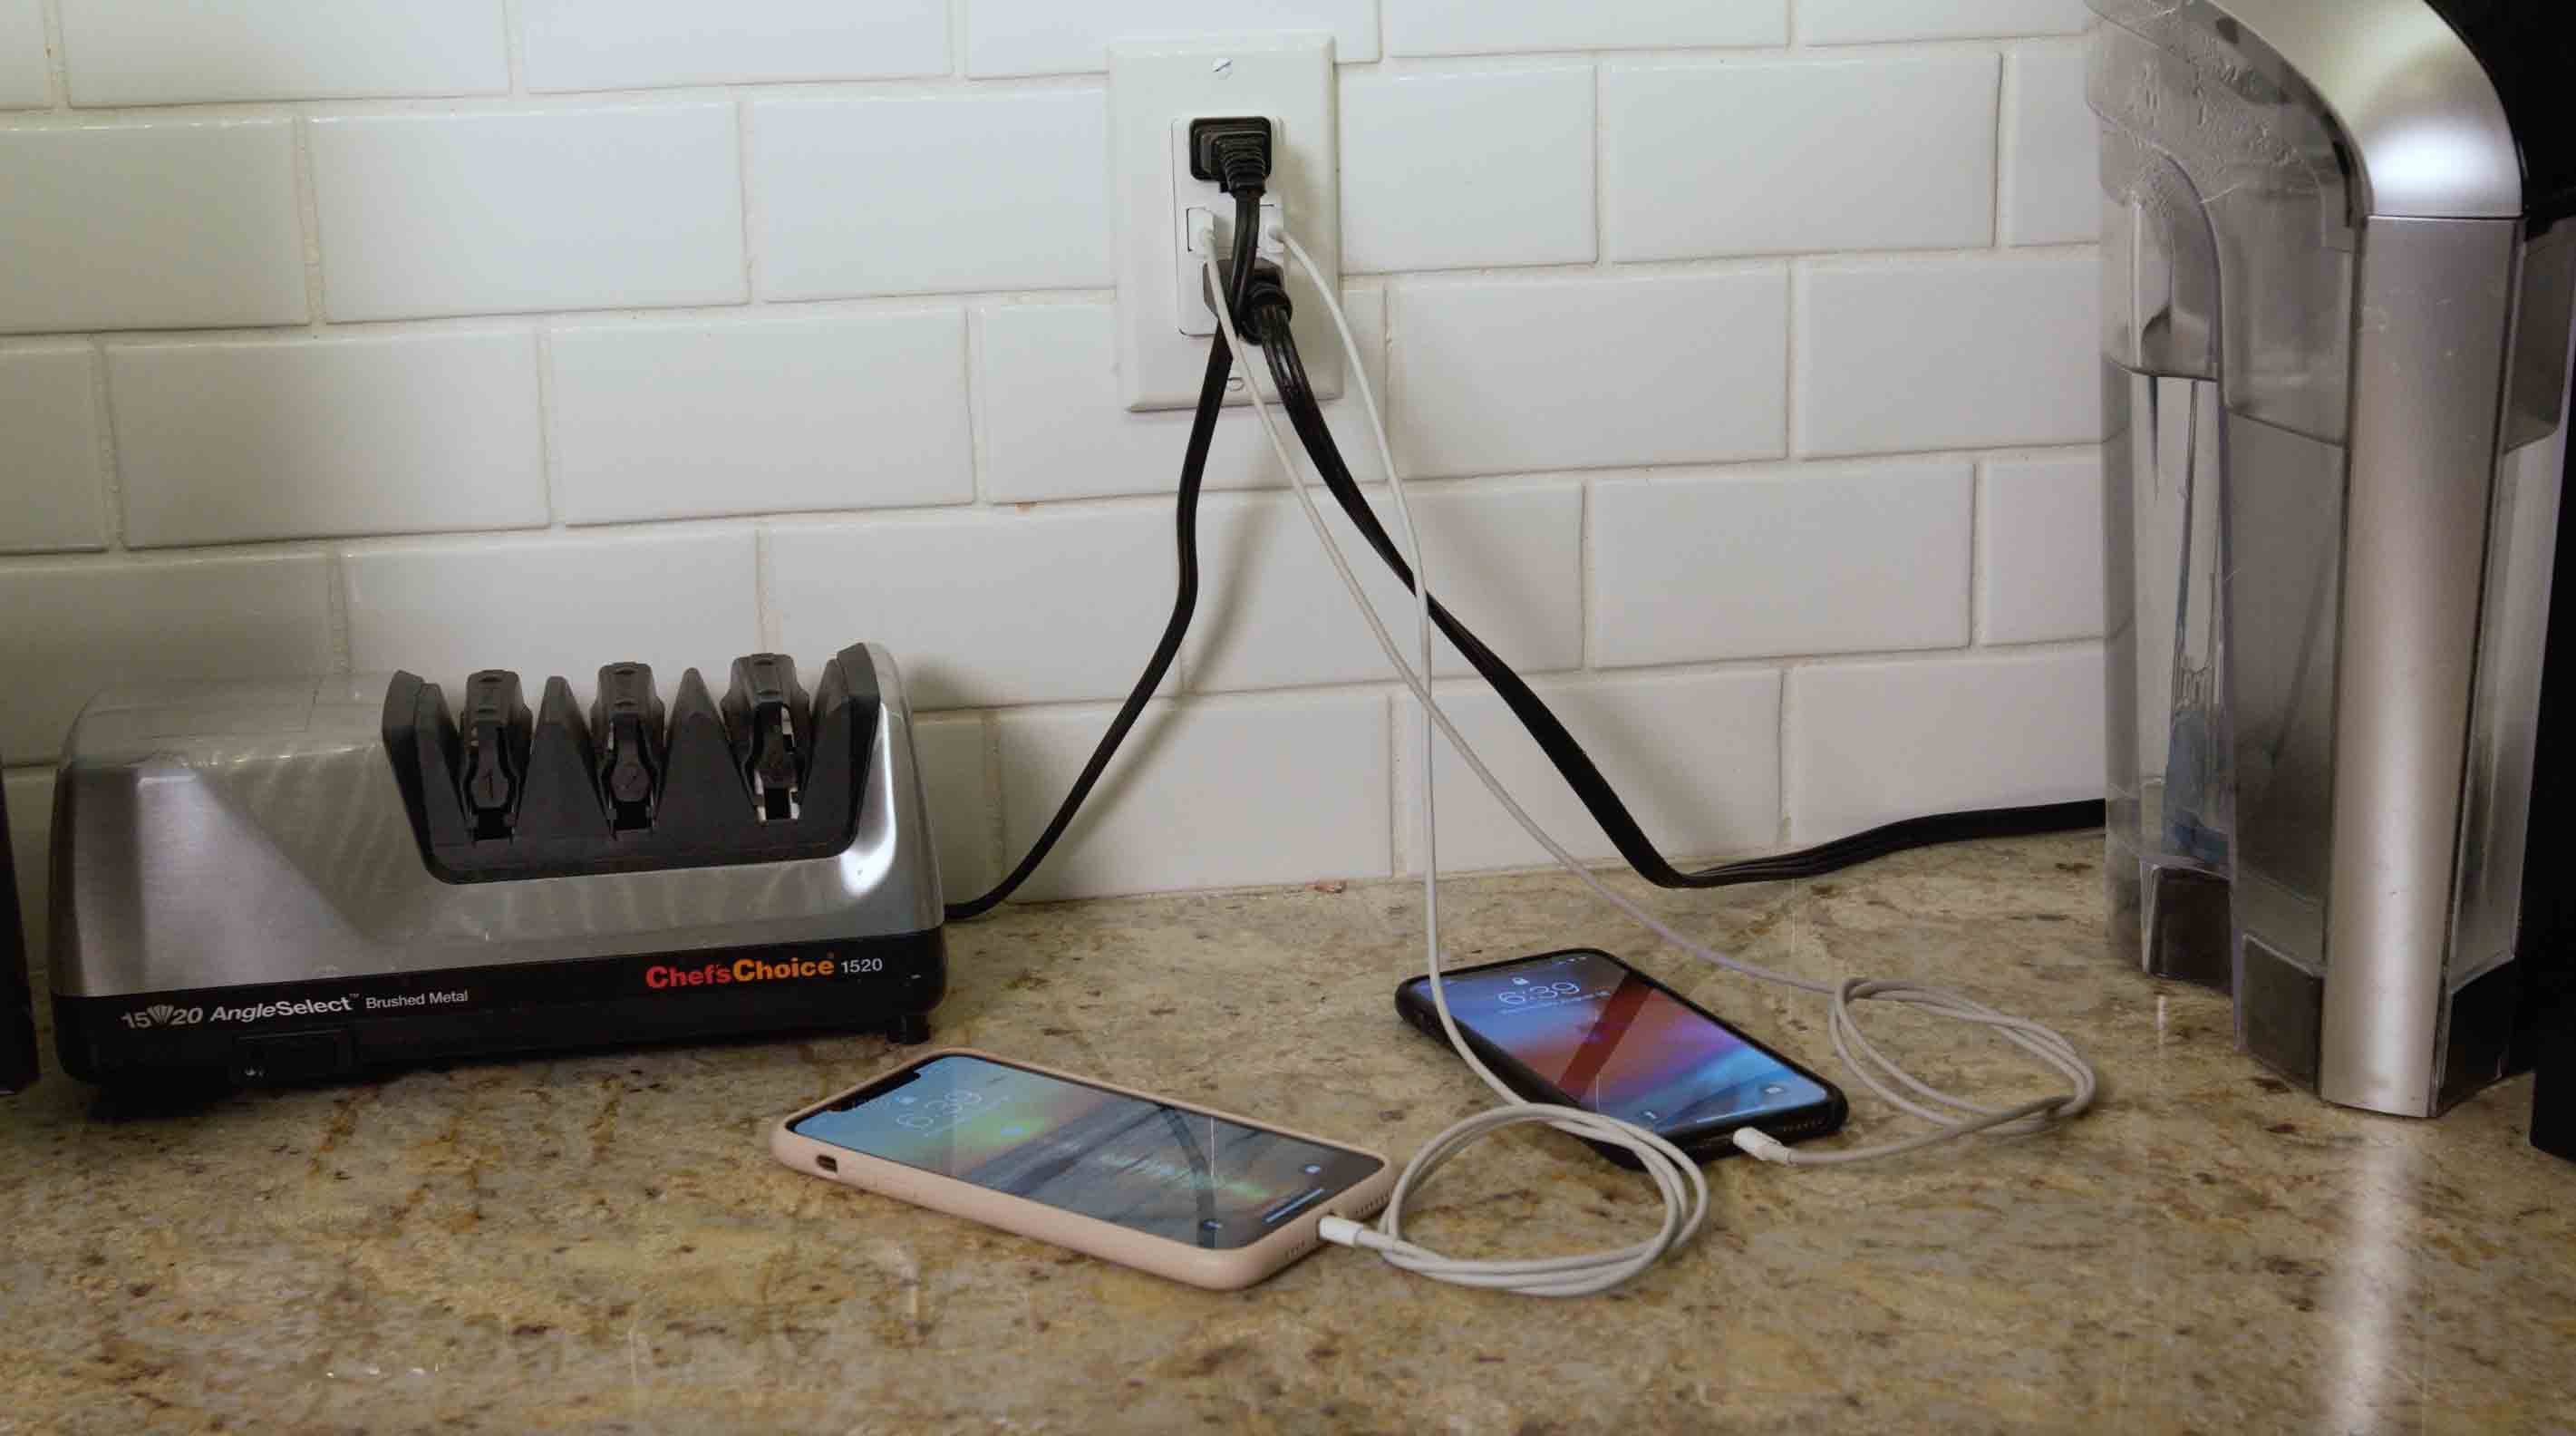 Electrical outlet with USB ports for Iphones and other electrical appliances in kitchen